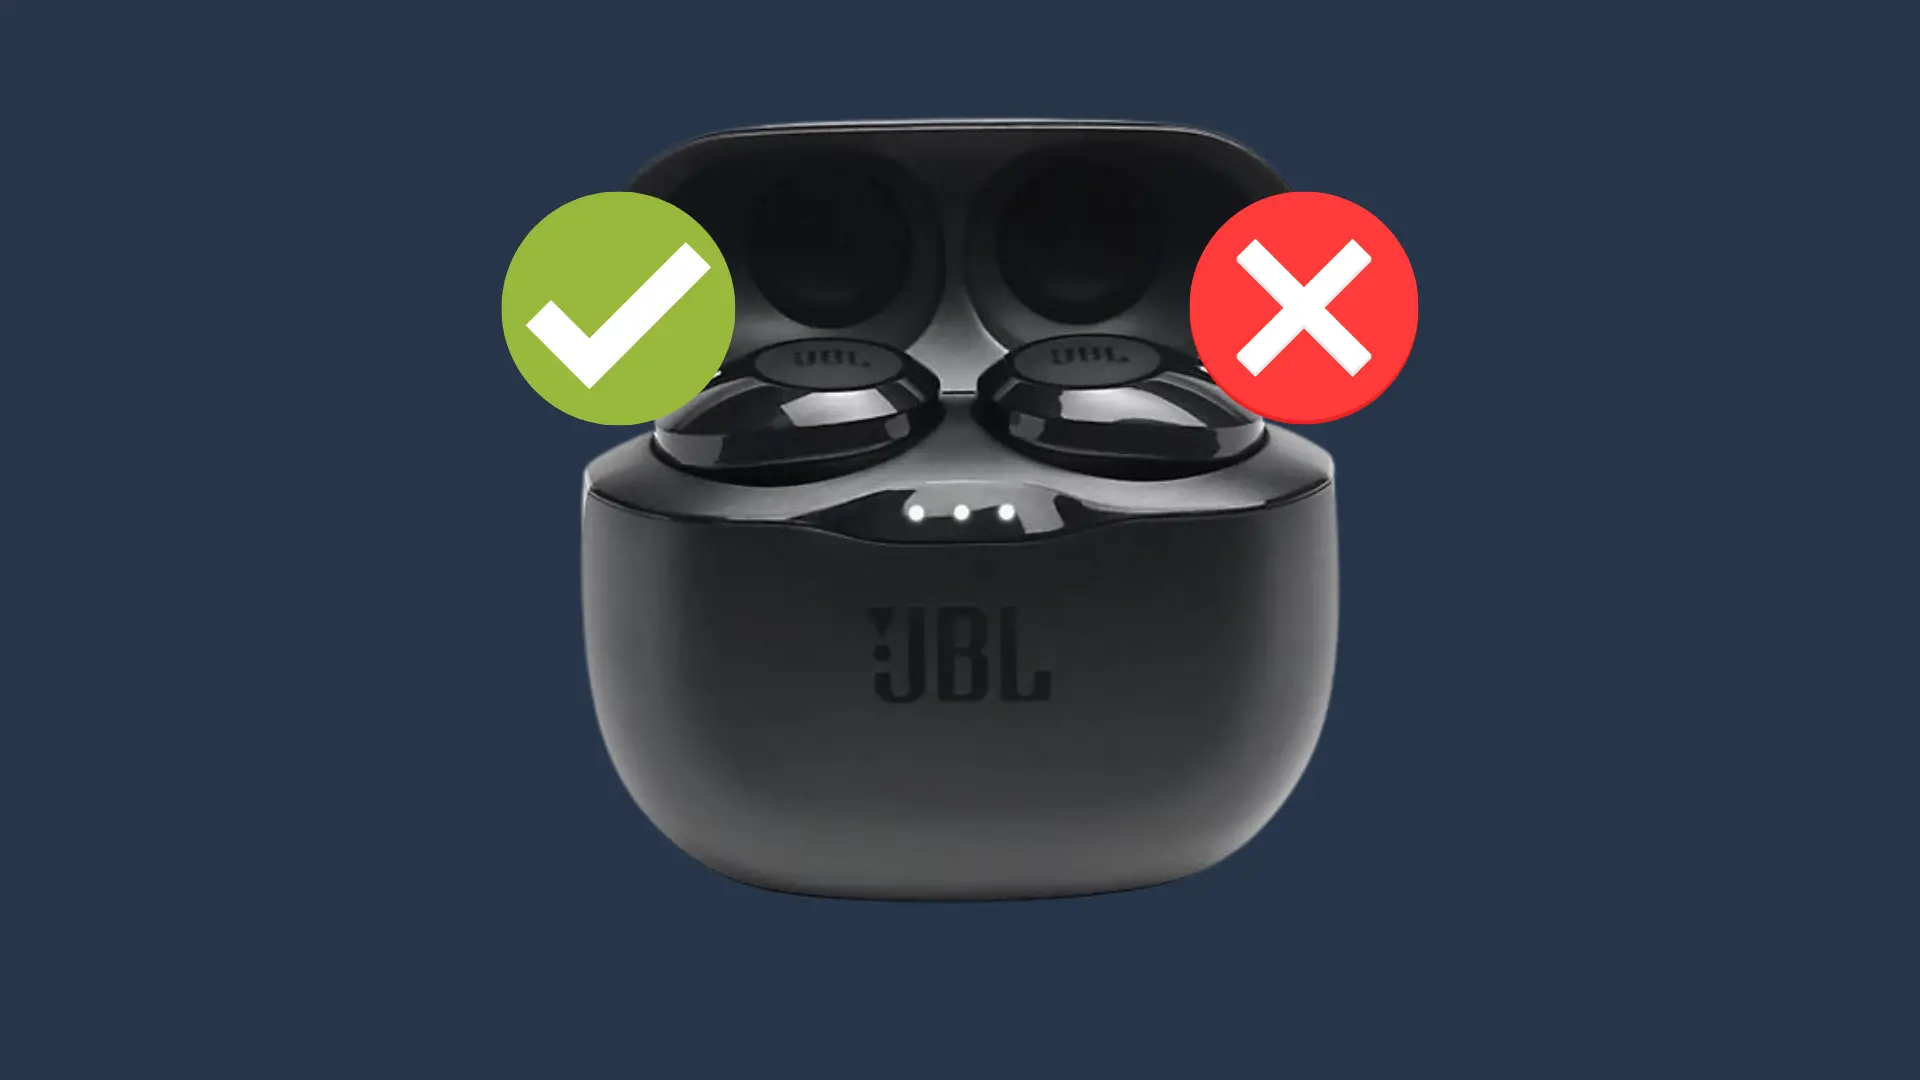 JBL Earbuds Side Not Working? Here's How To Fix Decortweaks